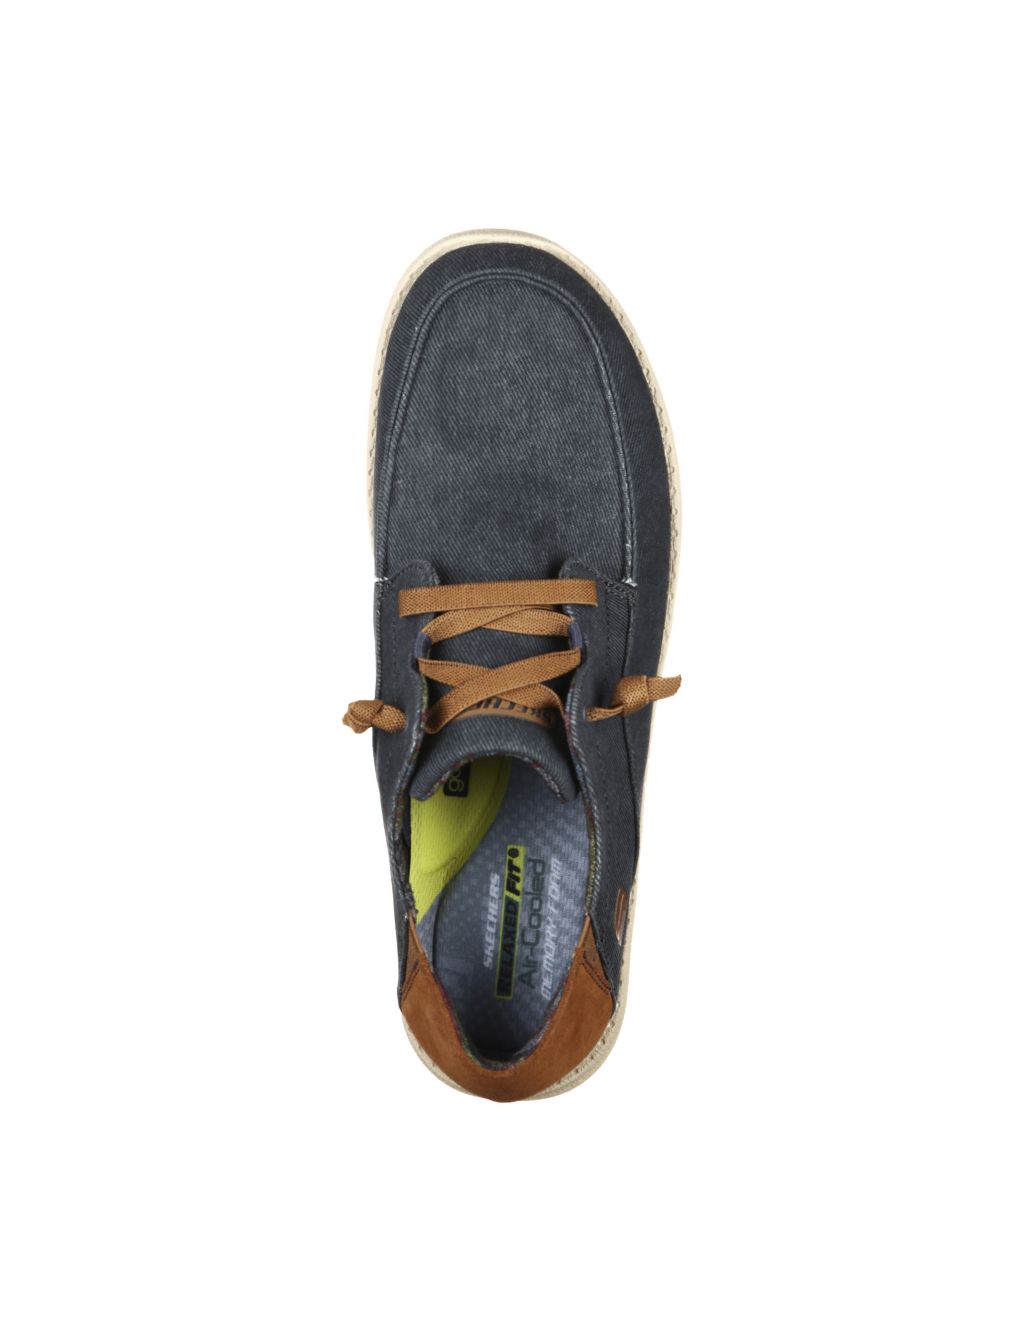 Melson Planon Boat Shoes image 4